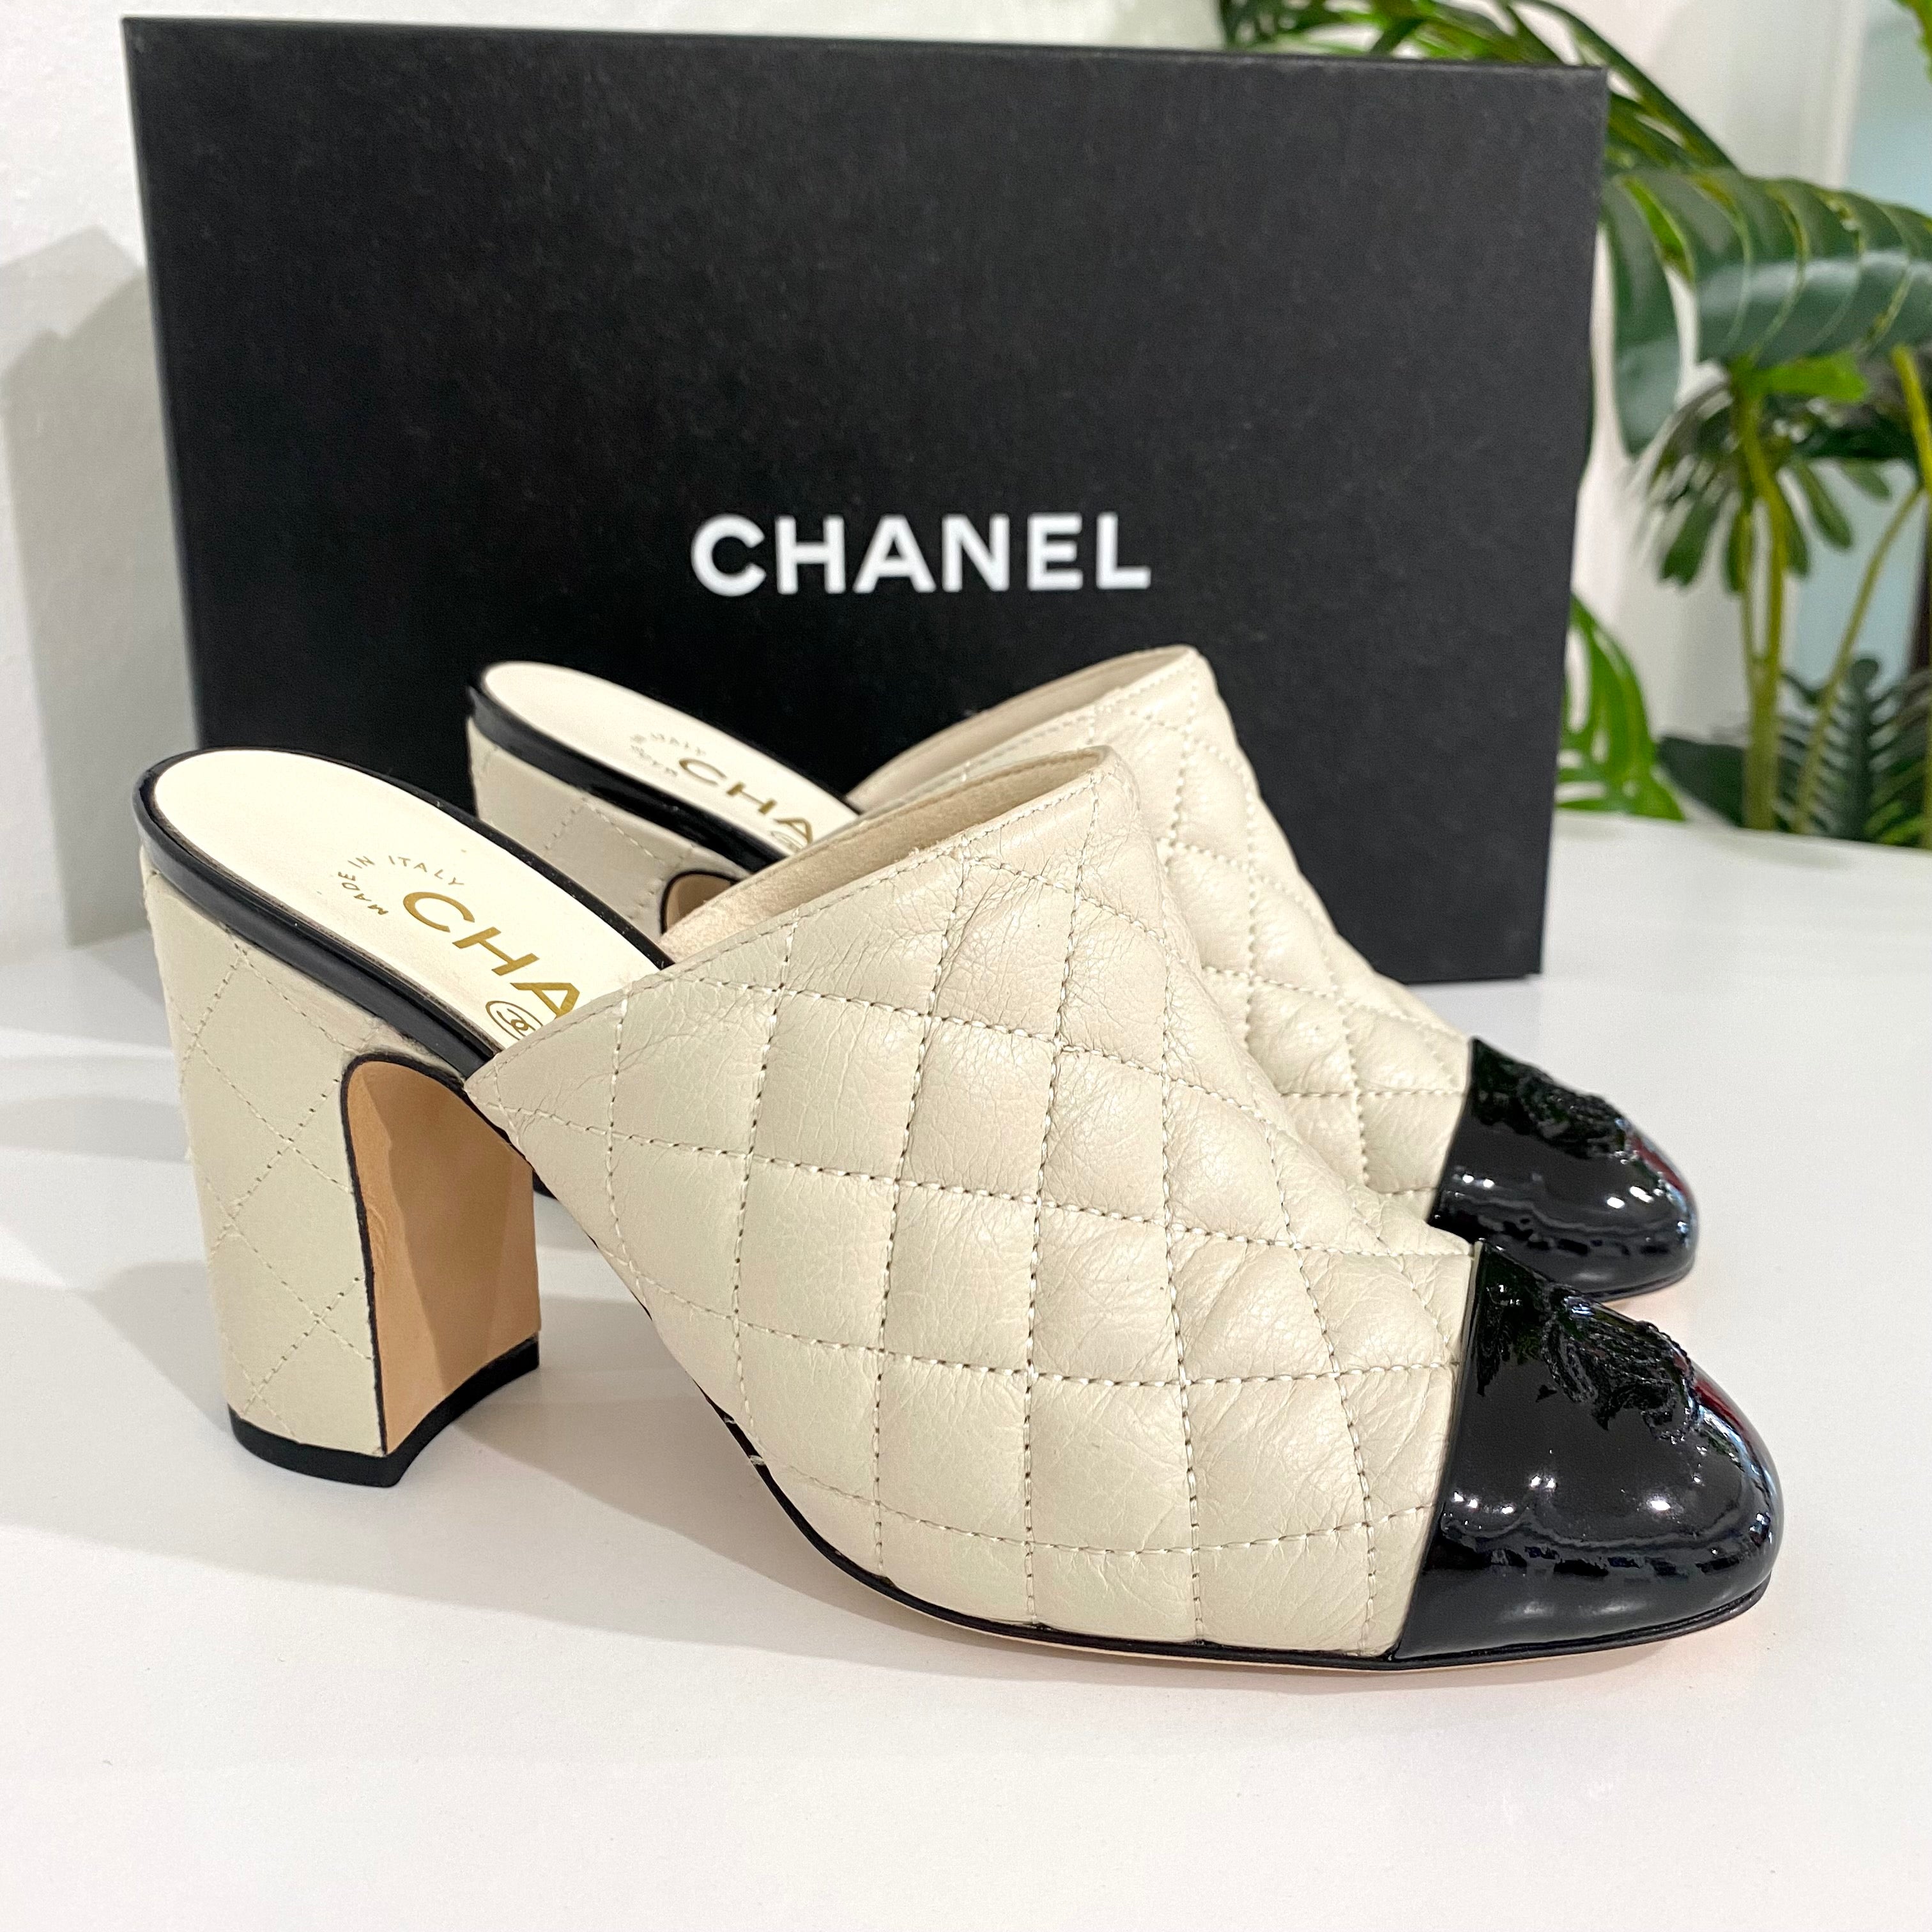 Chanel Clear Sandals - 4 For Sale on 1stDibs